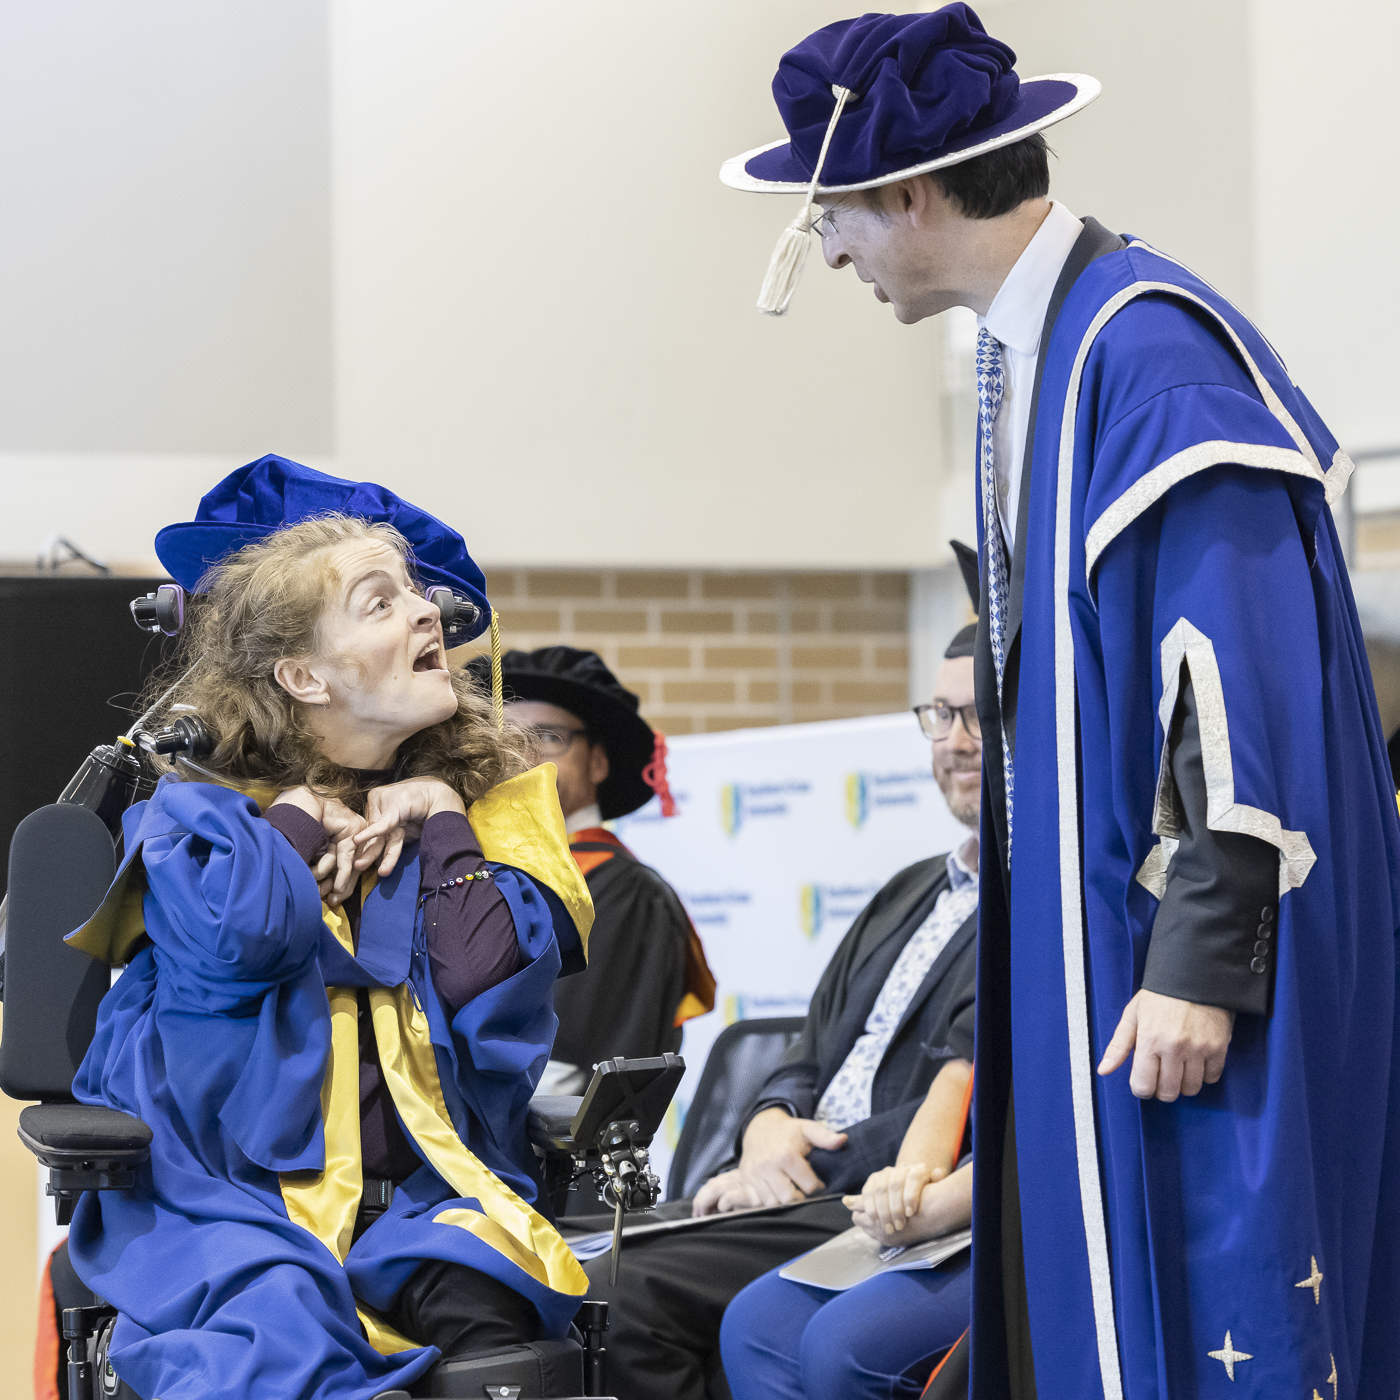 A woman wearing academic gown in a wheelchair exchanging conversation with a man also in academic gown.